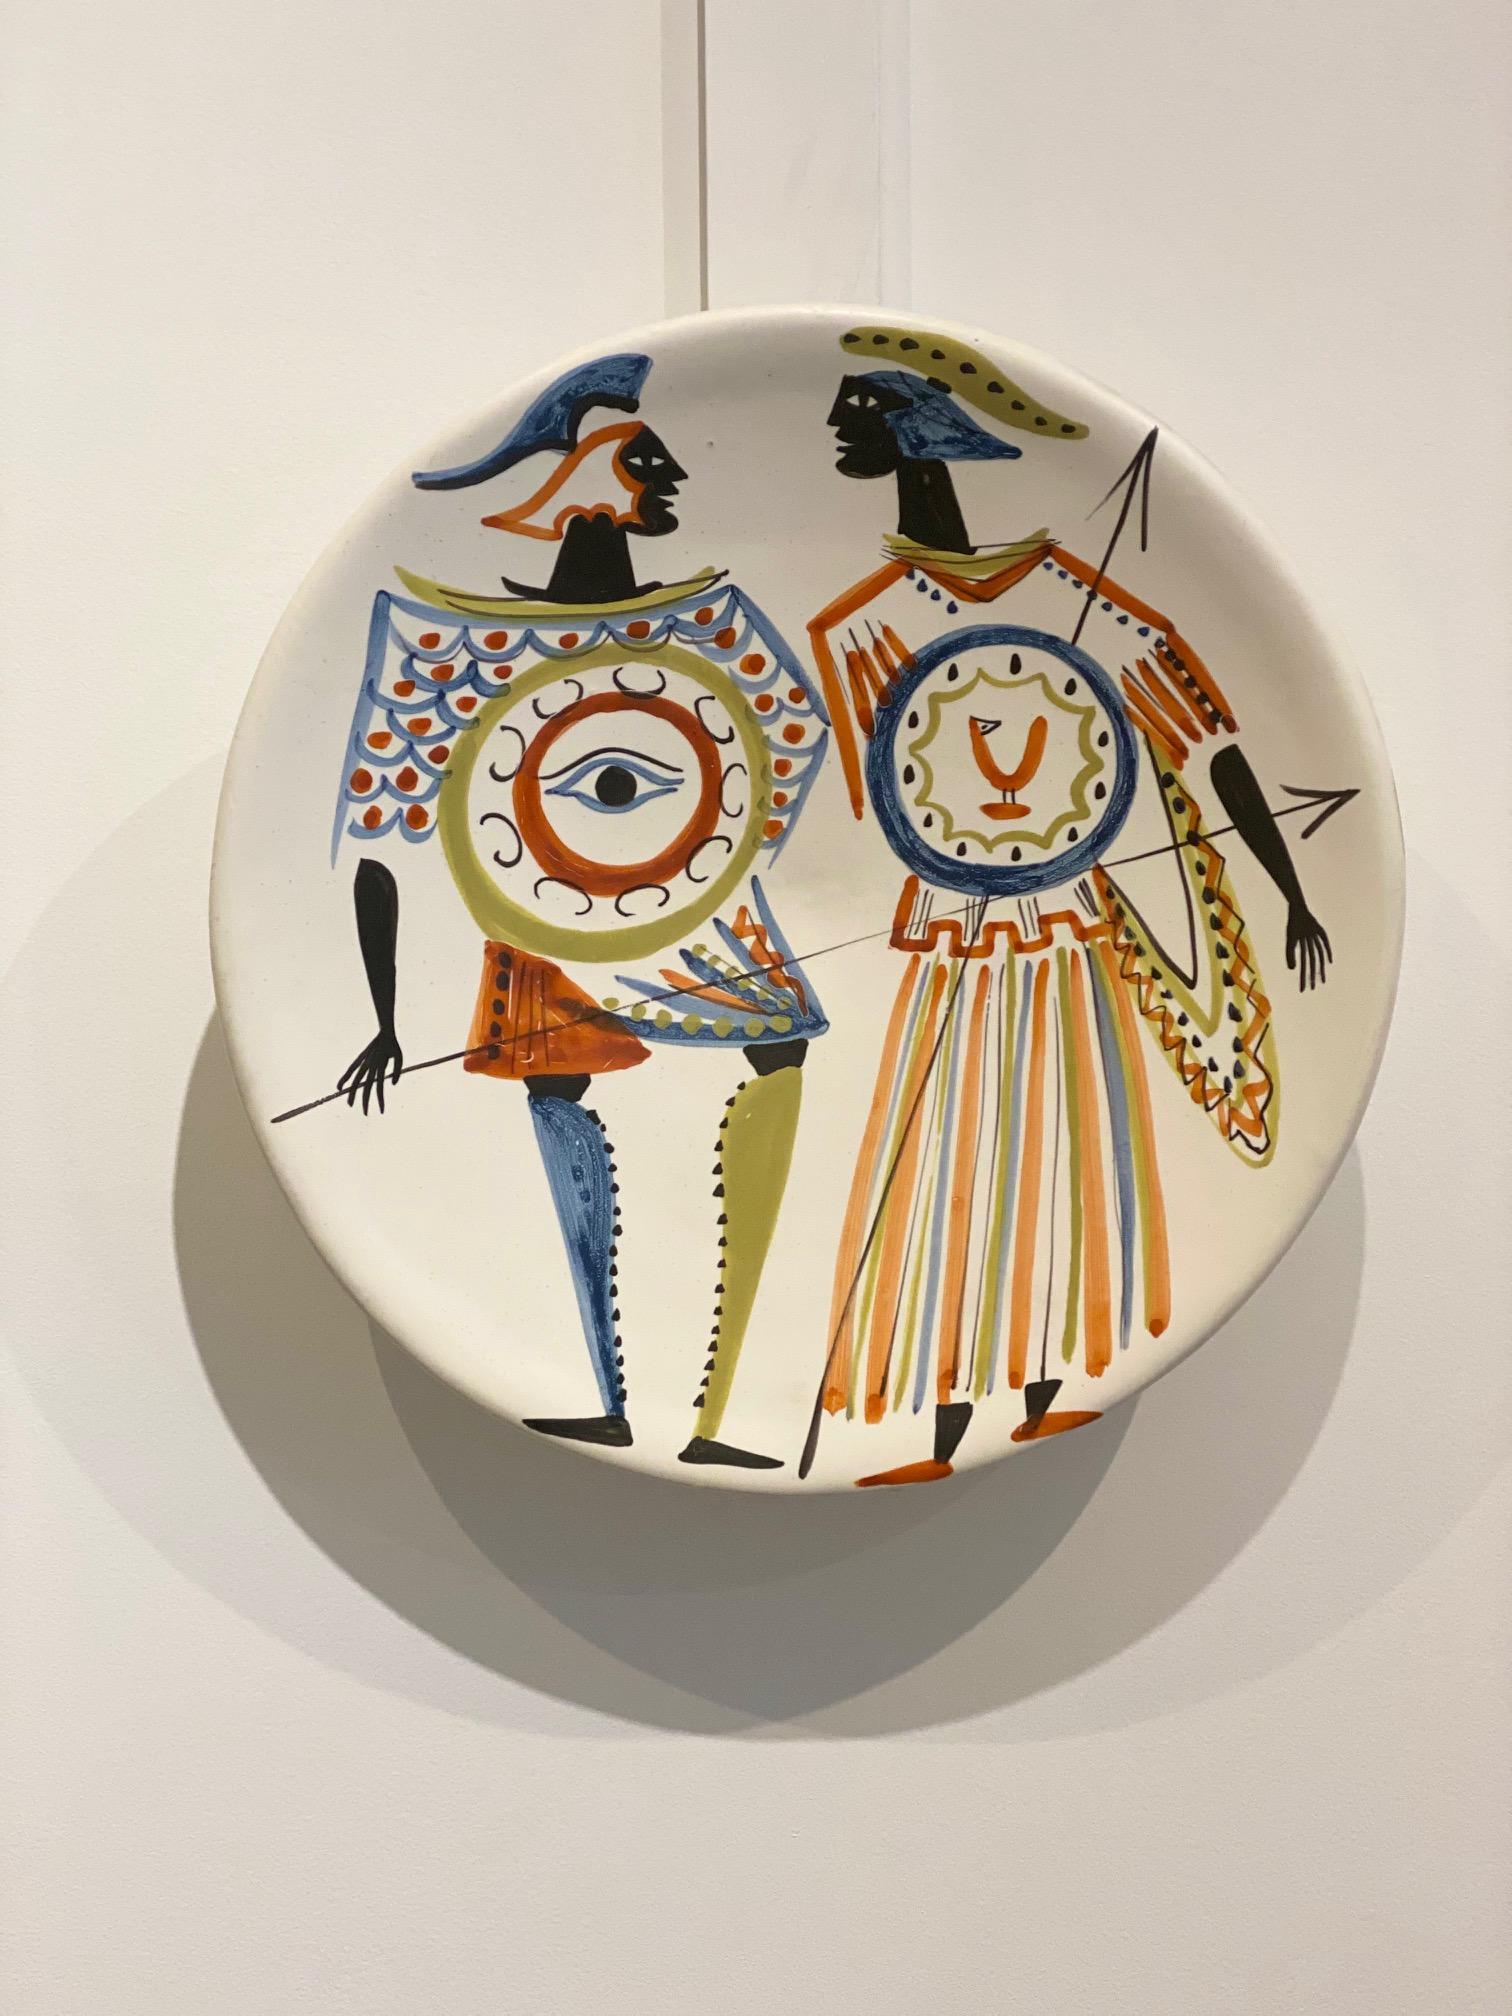 Roger Capron (1922-2006)
- Roger Capron studied at Art appliqués of Paris from 1938 to 1943 before teaching drawing in the same establishment from 1945. In 1946, he settled in Vallauris where he created a ceramic workshop.
- Large and thick dish,